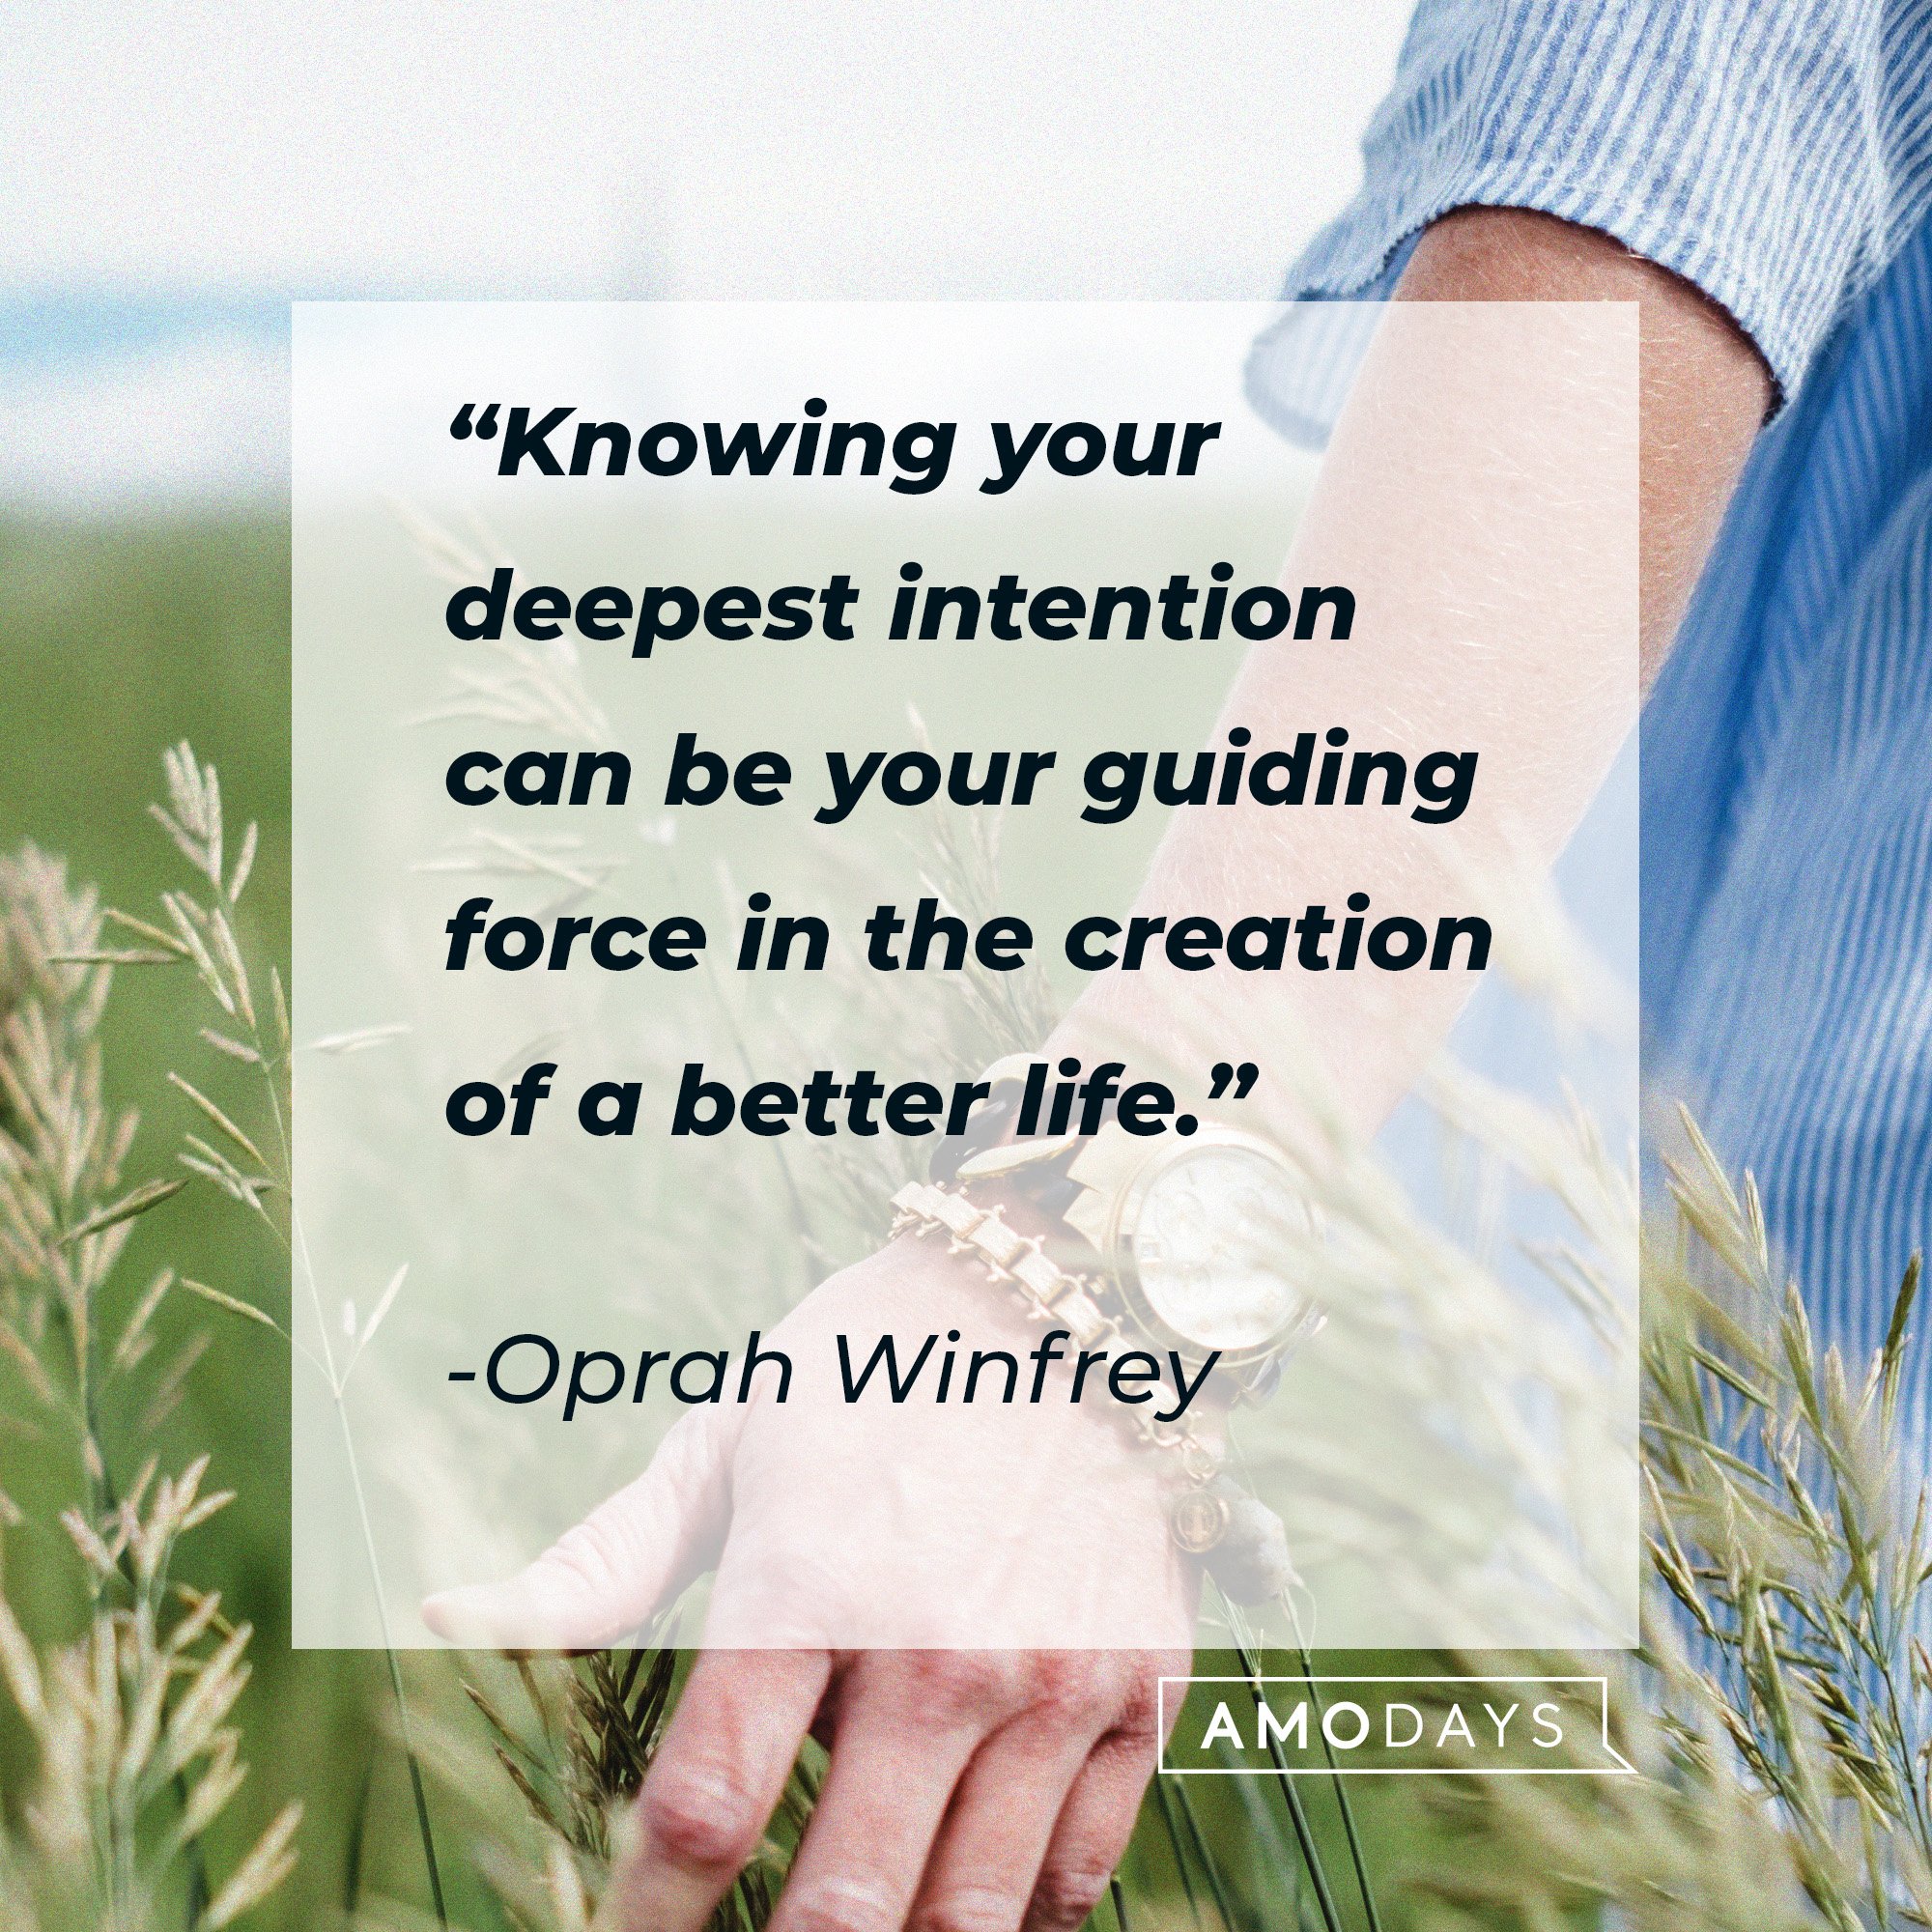 Oprah Winfrey's quote: “Knowing your deepest intention can be your guiding force in the creation of a better life.” | Image: AmoDays